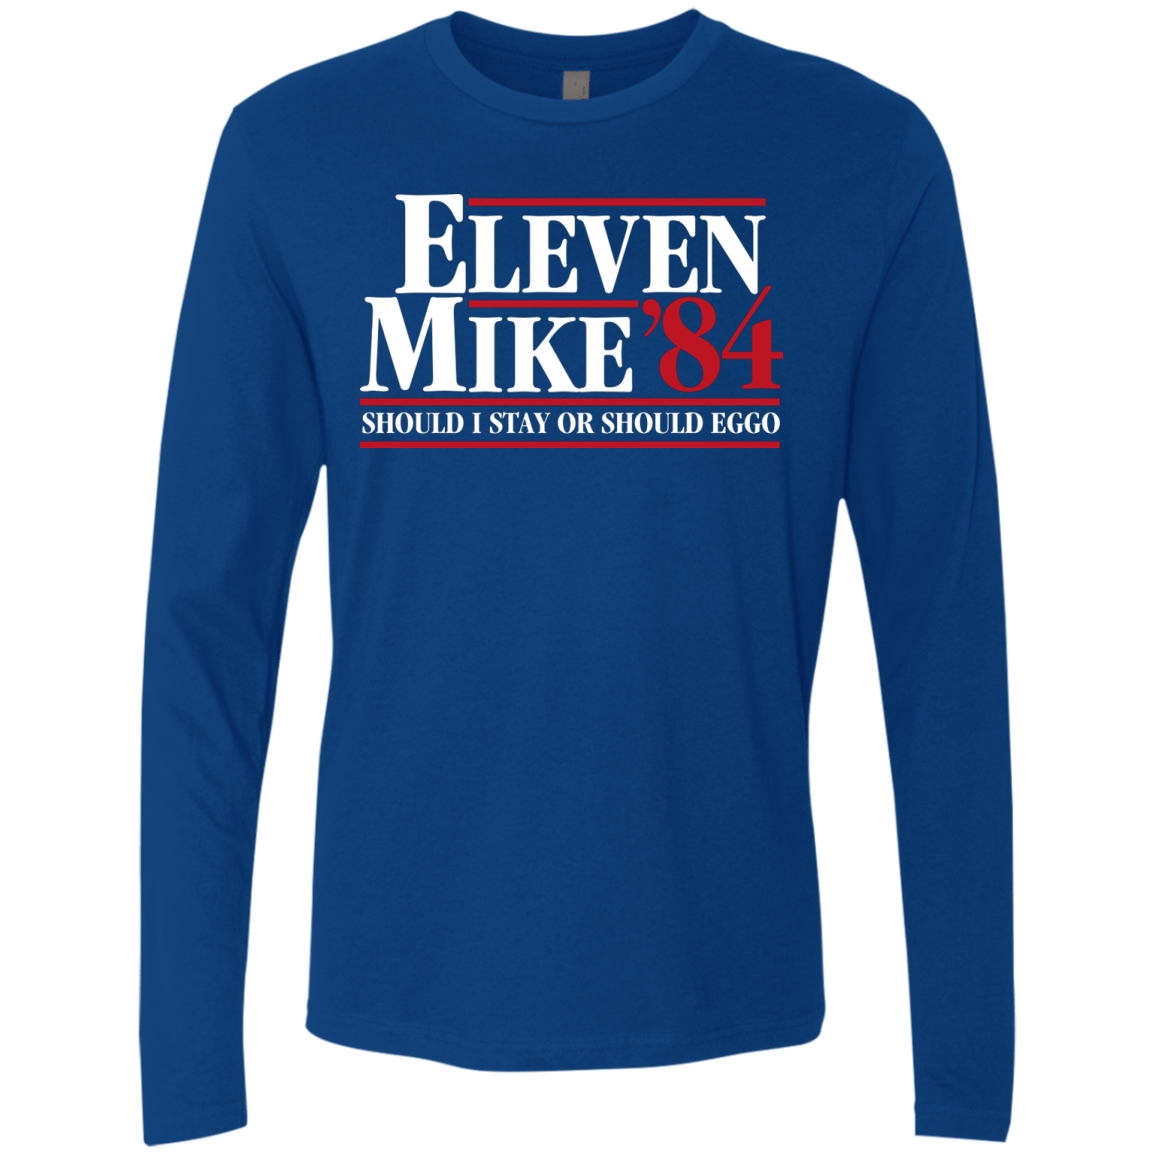 T-Shirts Royal / Small Eleven Mike 84 - Should I Stay or Should Eggo Men's Premium Long Sleeve